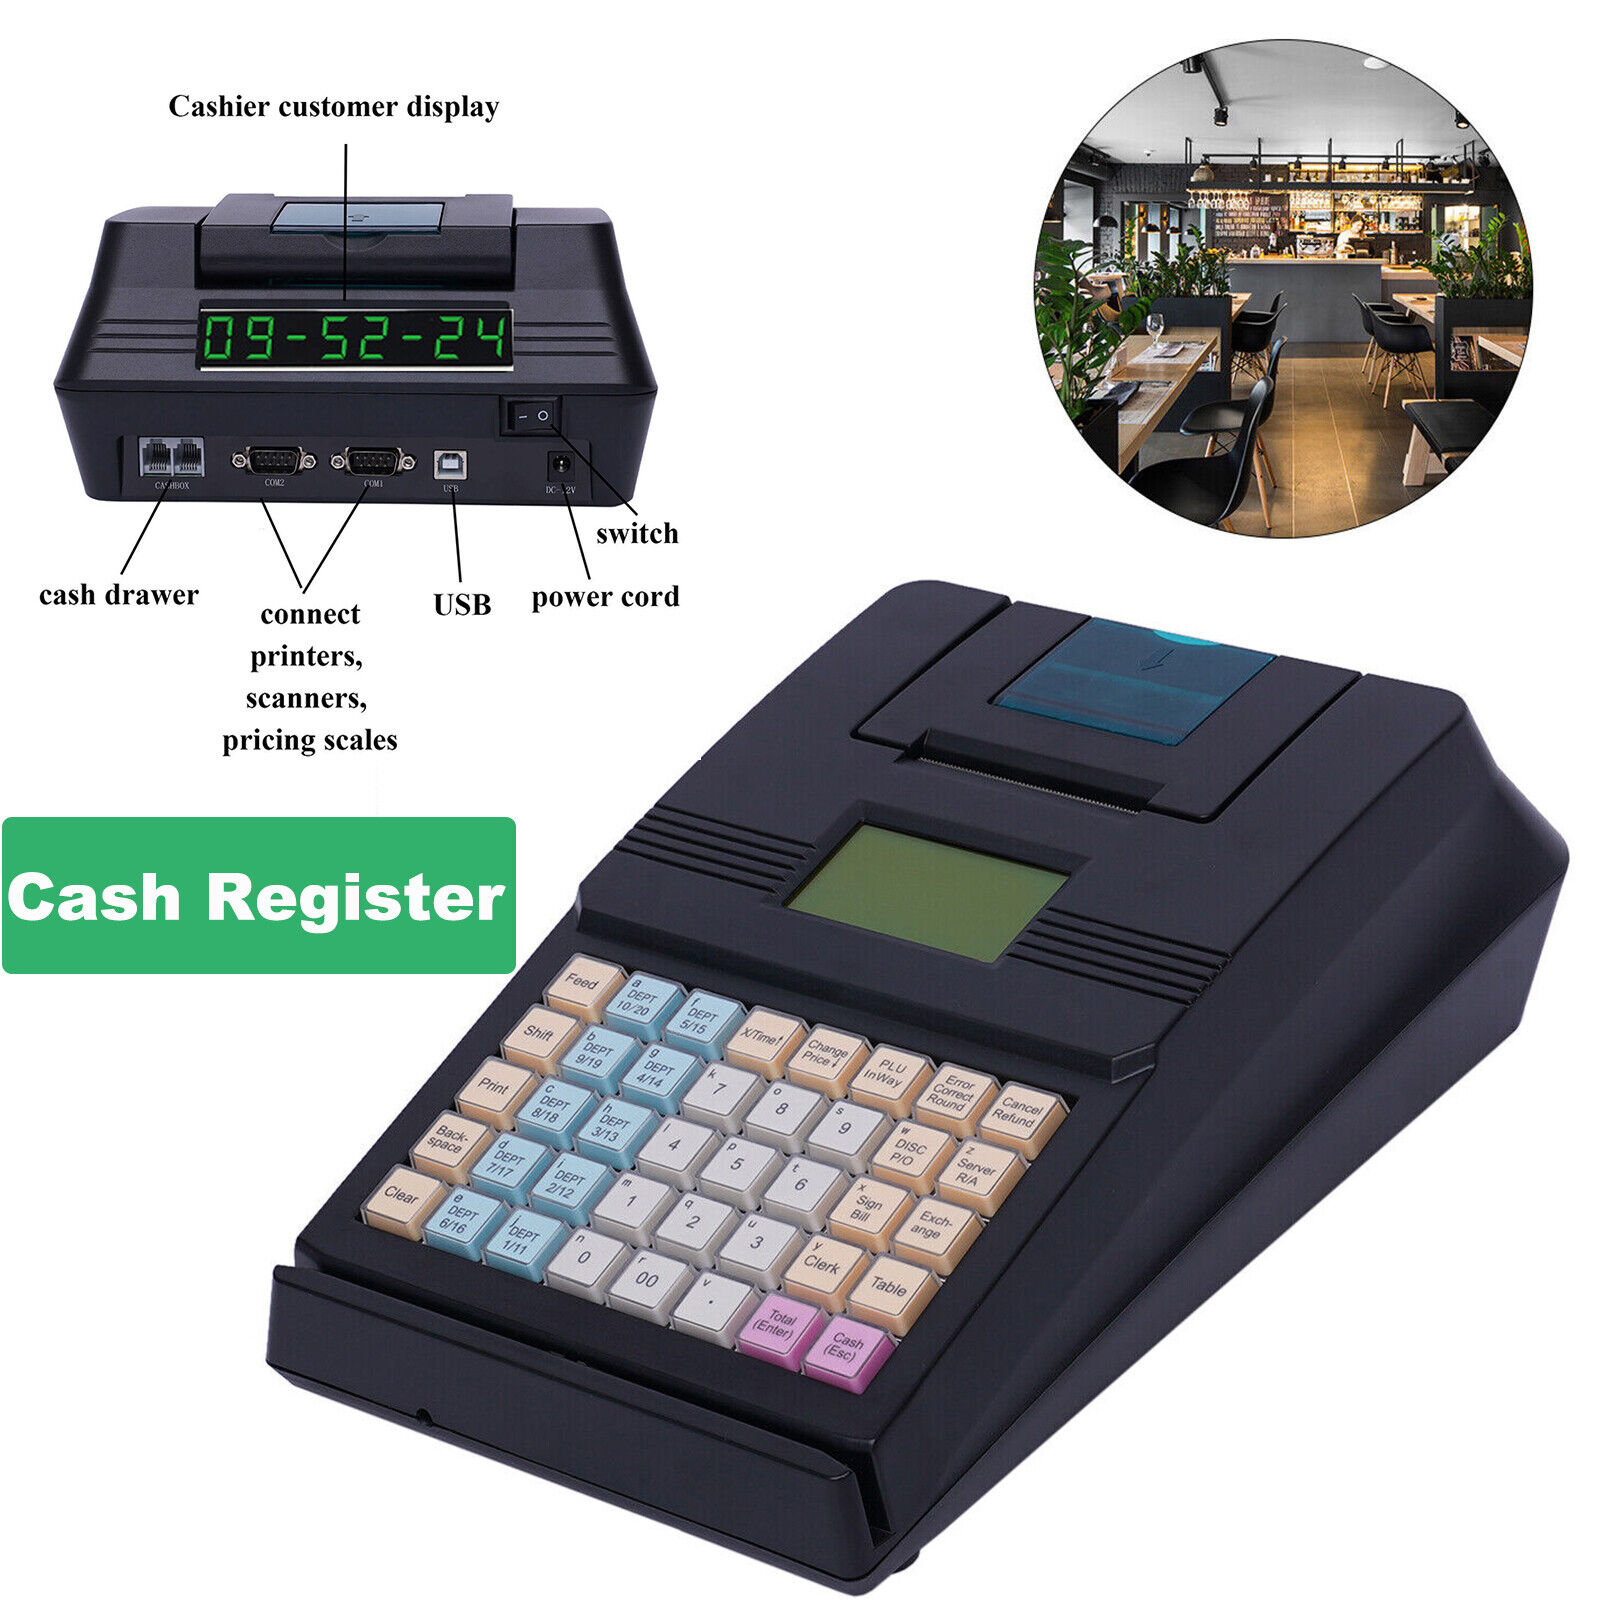 Cash Register POS System Electronic Printing Casher for Retailer, Small Business Unbranded Does Not Apply